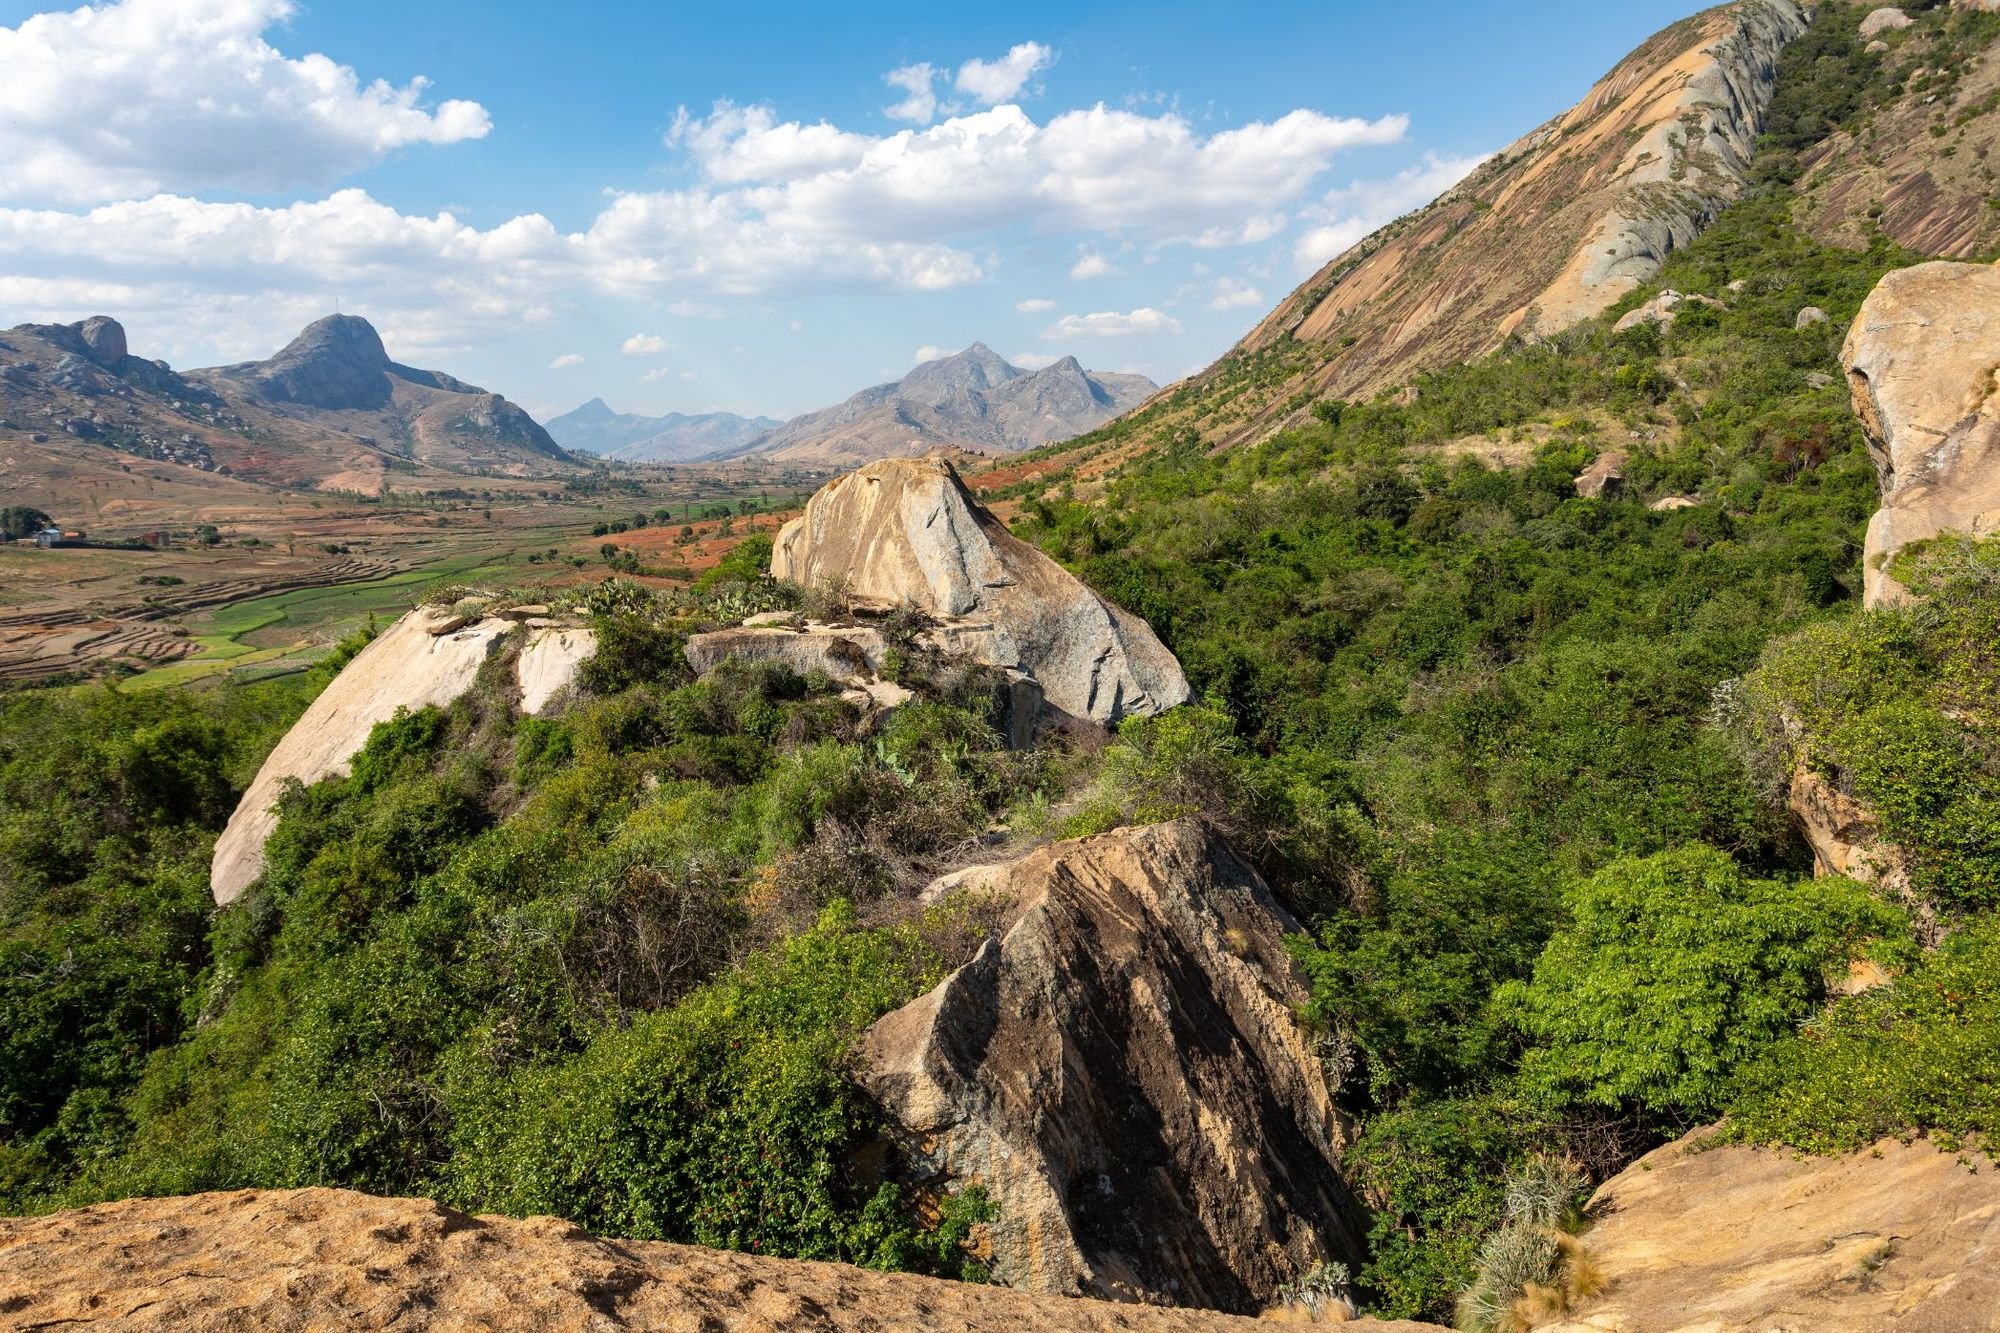 A far-reaching view out over the mountains from one of the hiking trails at Anja community reserve. Photo: Getty